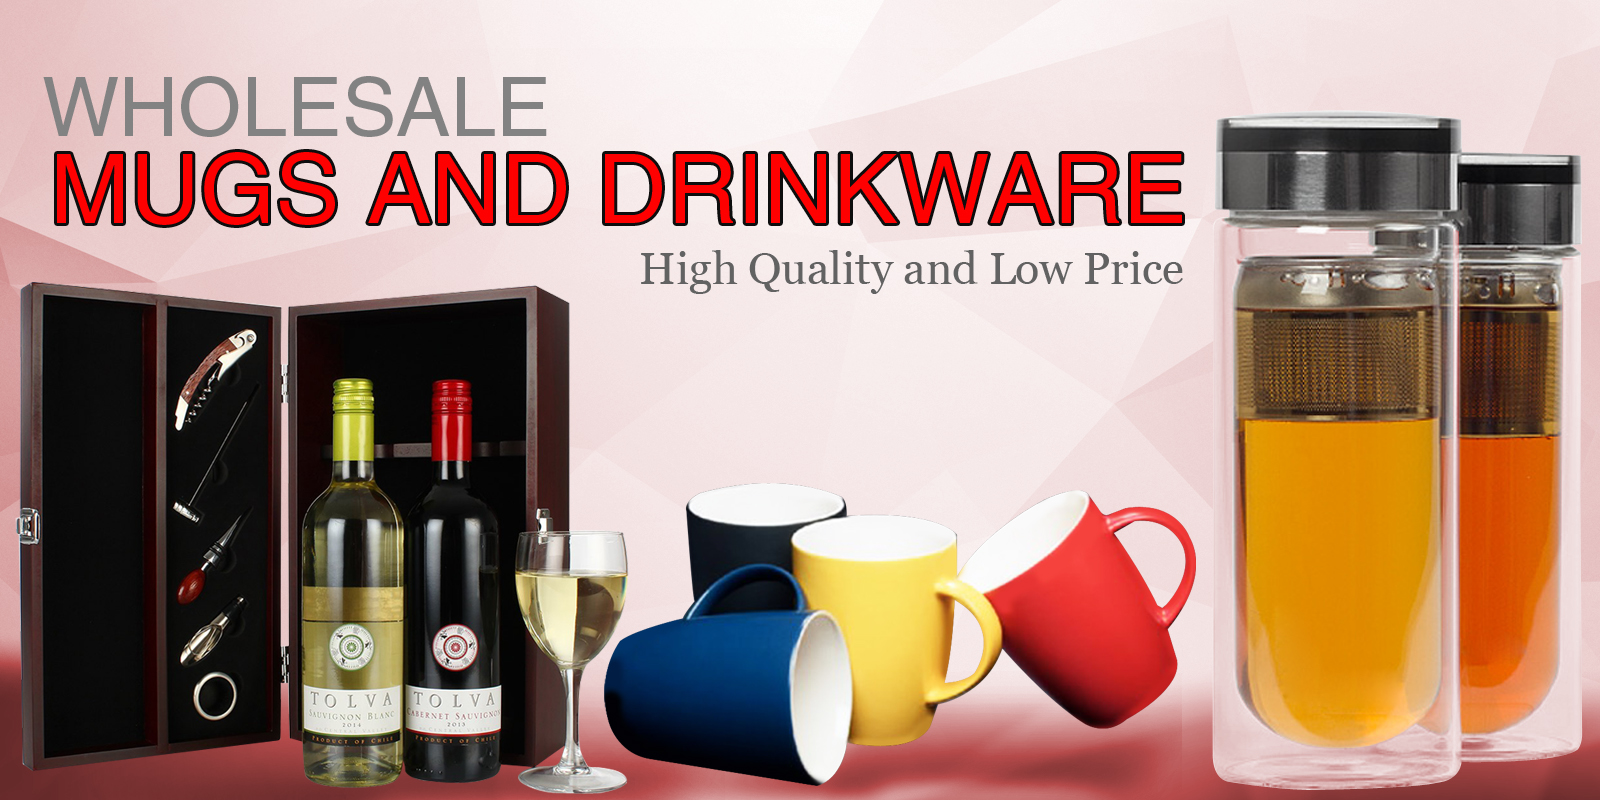 Promote in Style via Wholesale Mugs and Drinkware at High Quality and Low Price